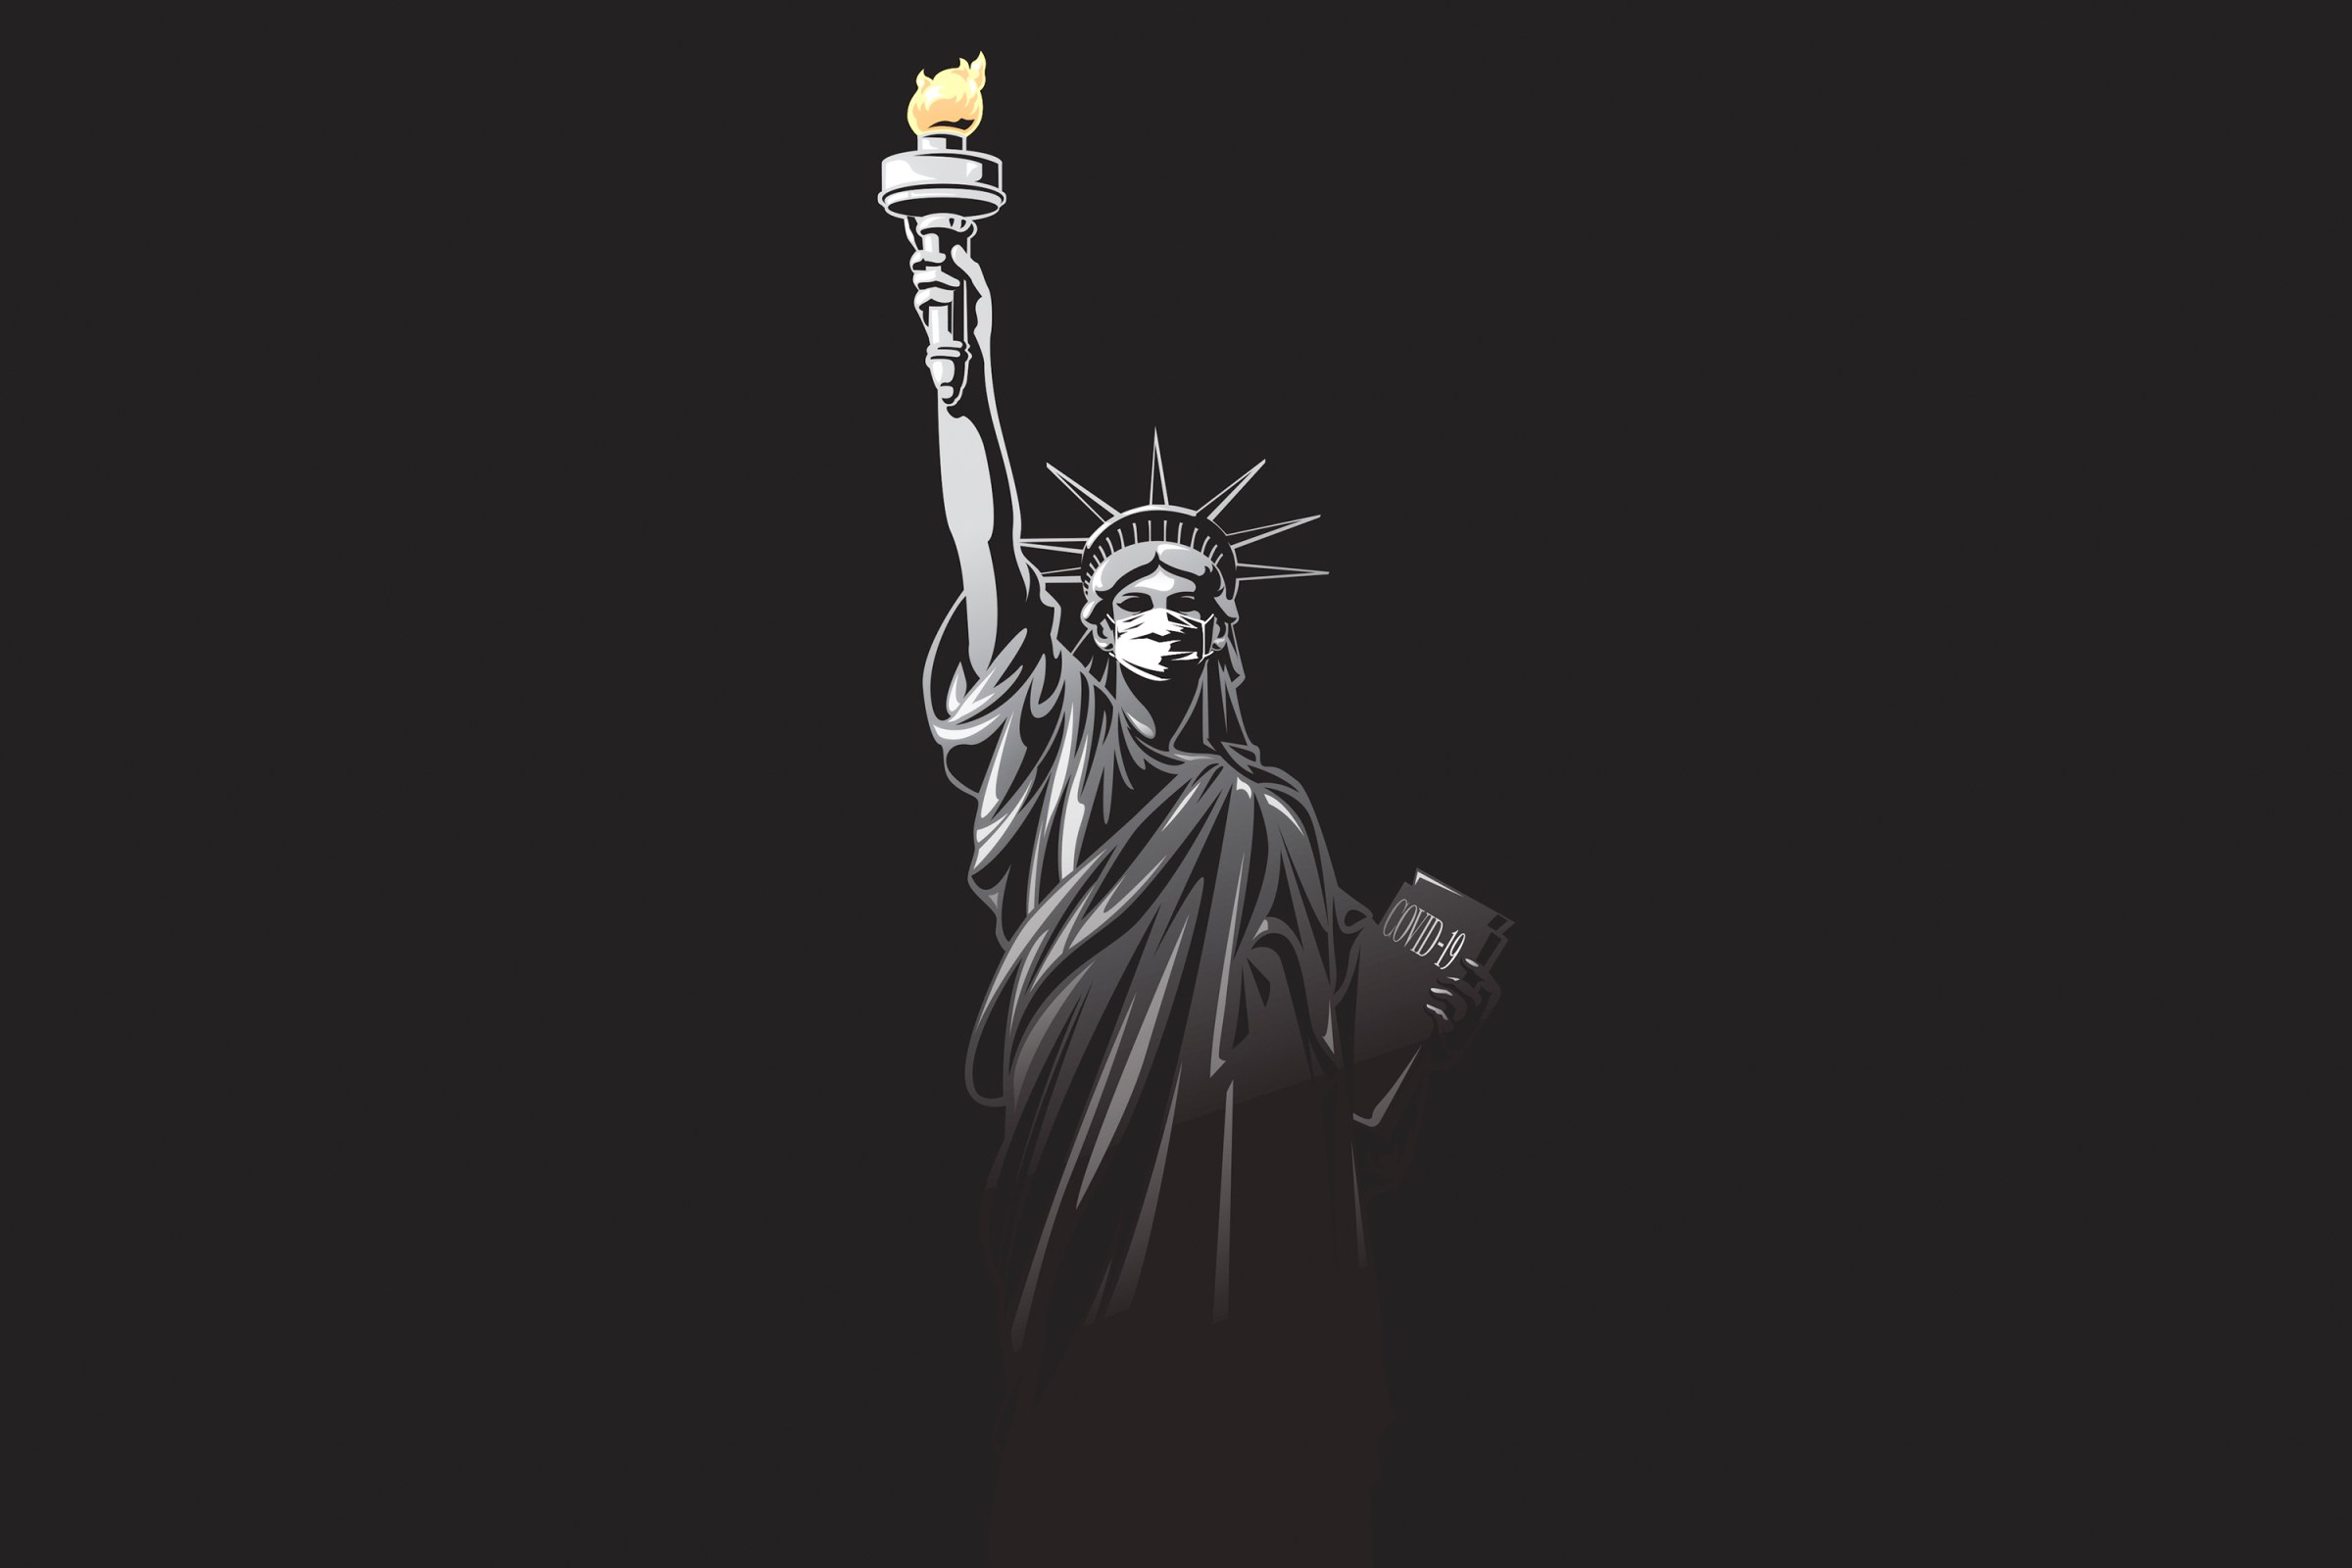 An illustration of the Statue of Liberty in a mask.